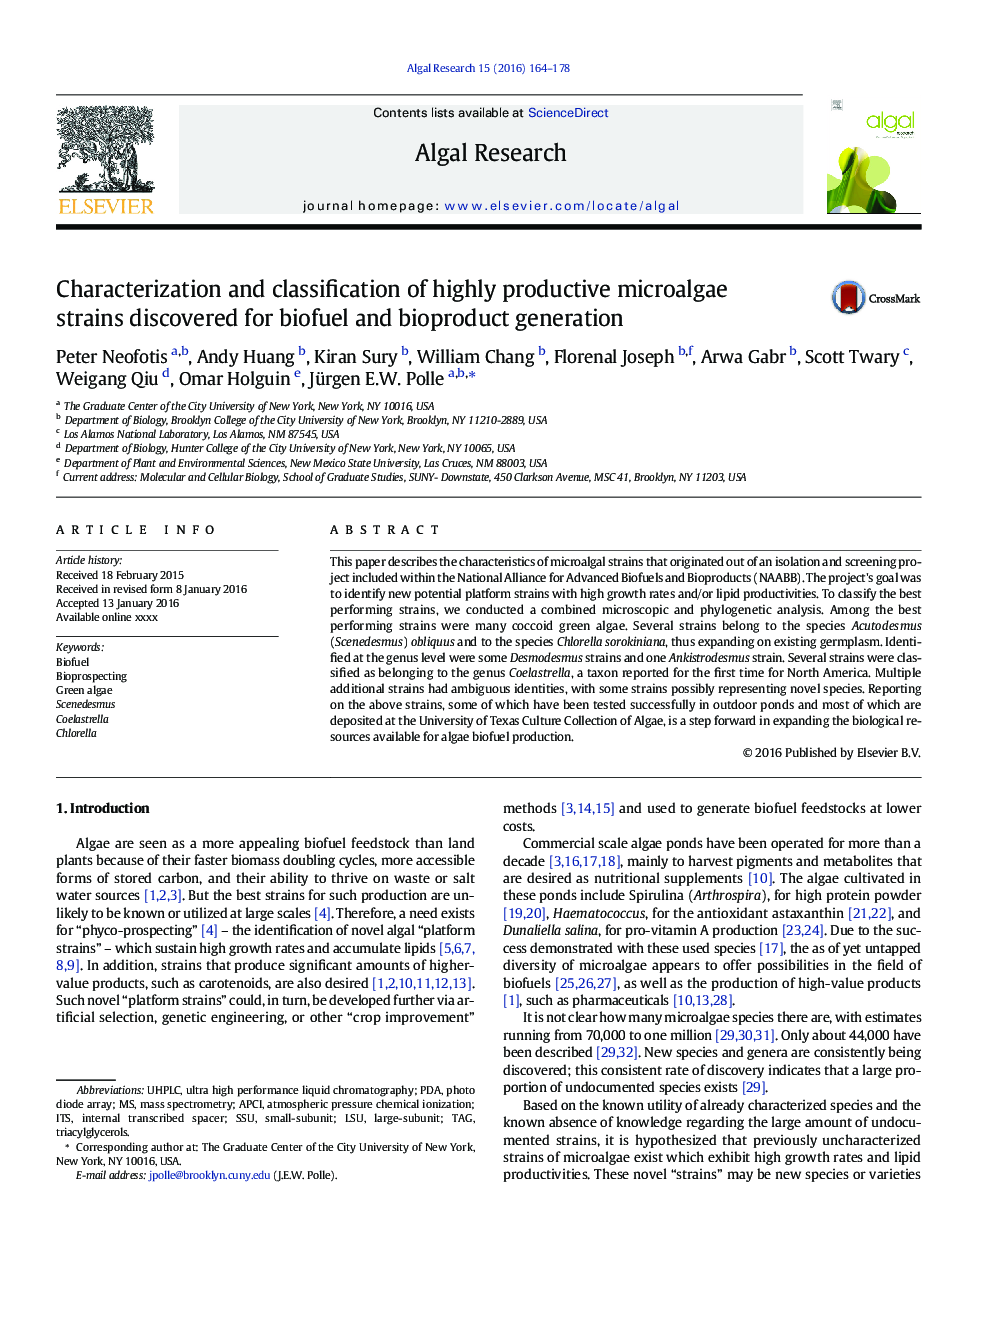 Characterization and classification of highly productive microalgae strains discovered for biofuel and bioproduct generation